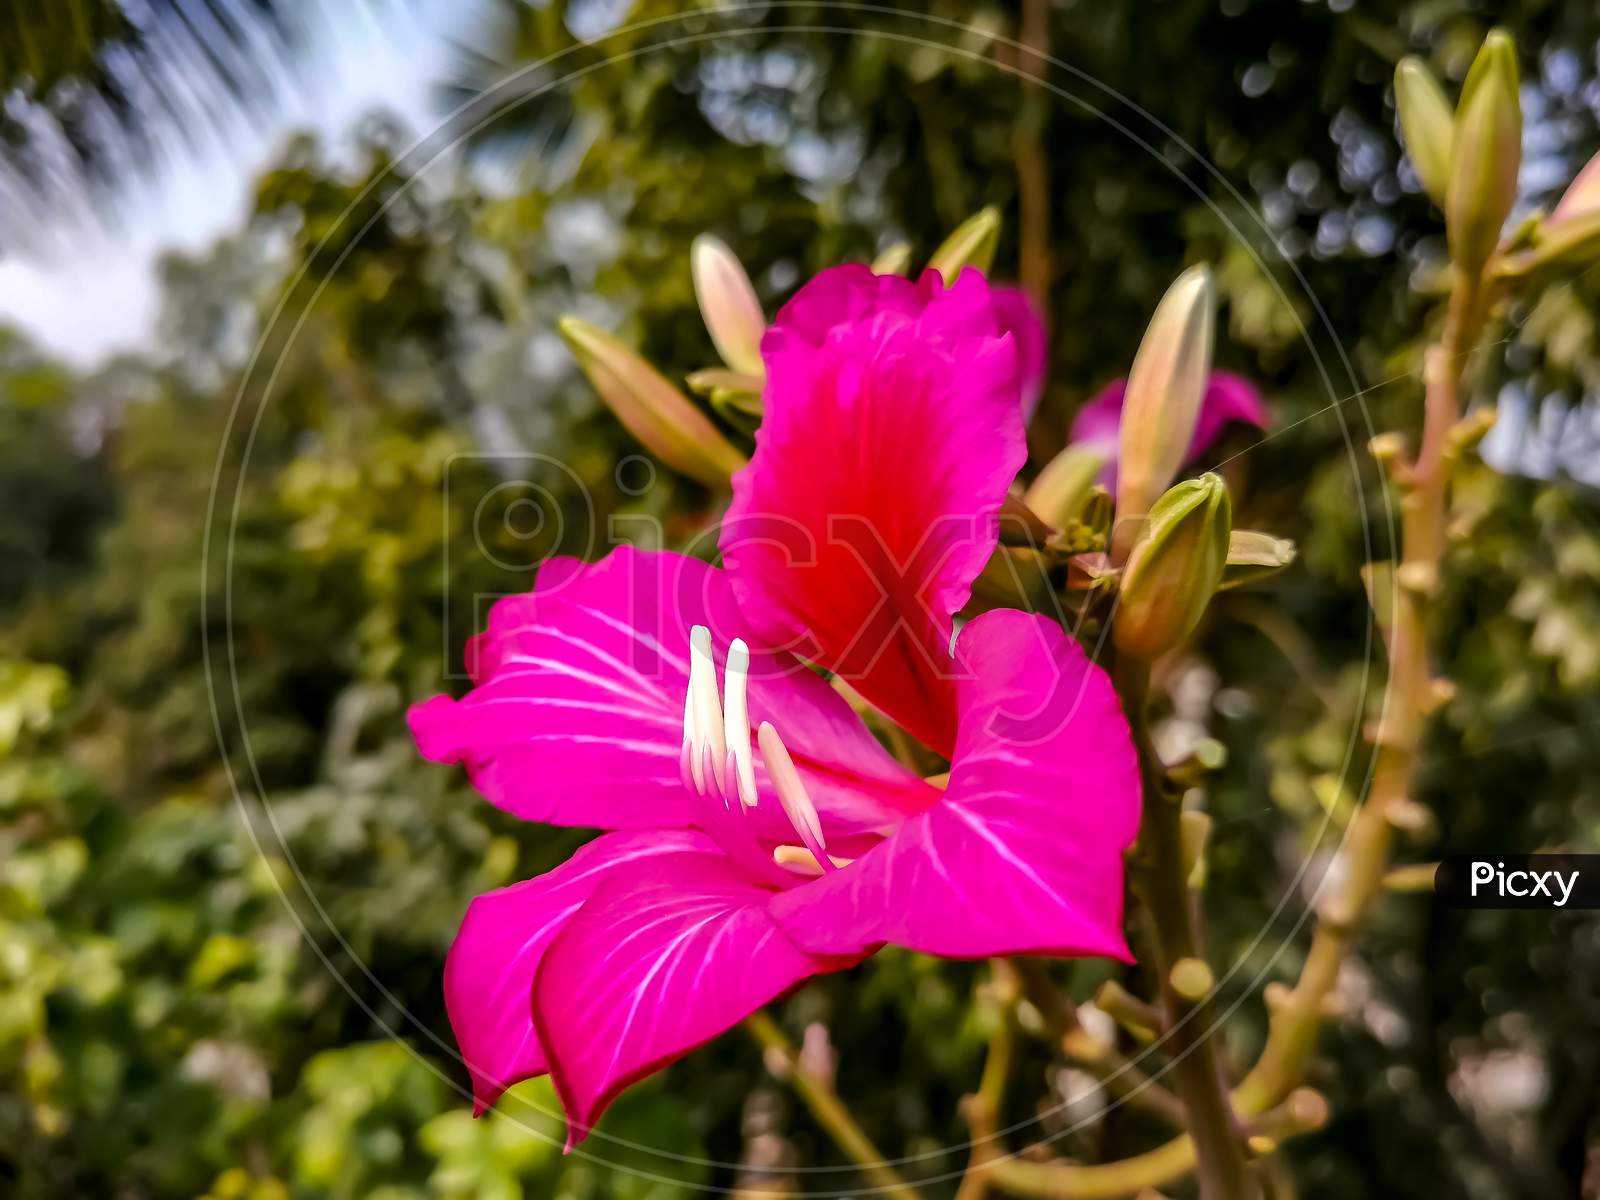 Bauhinia flower fast growing tree and produces spectacular flowers of magenta.